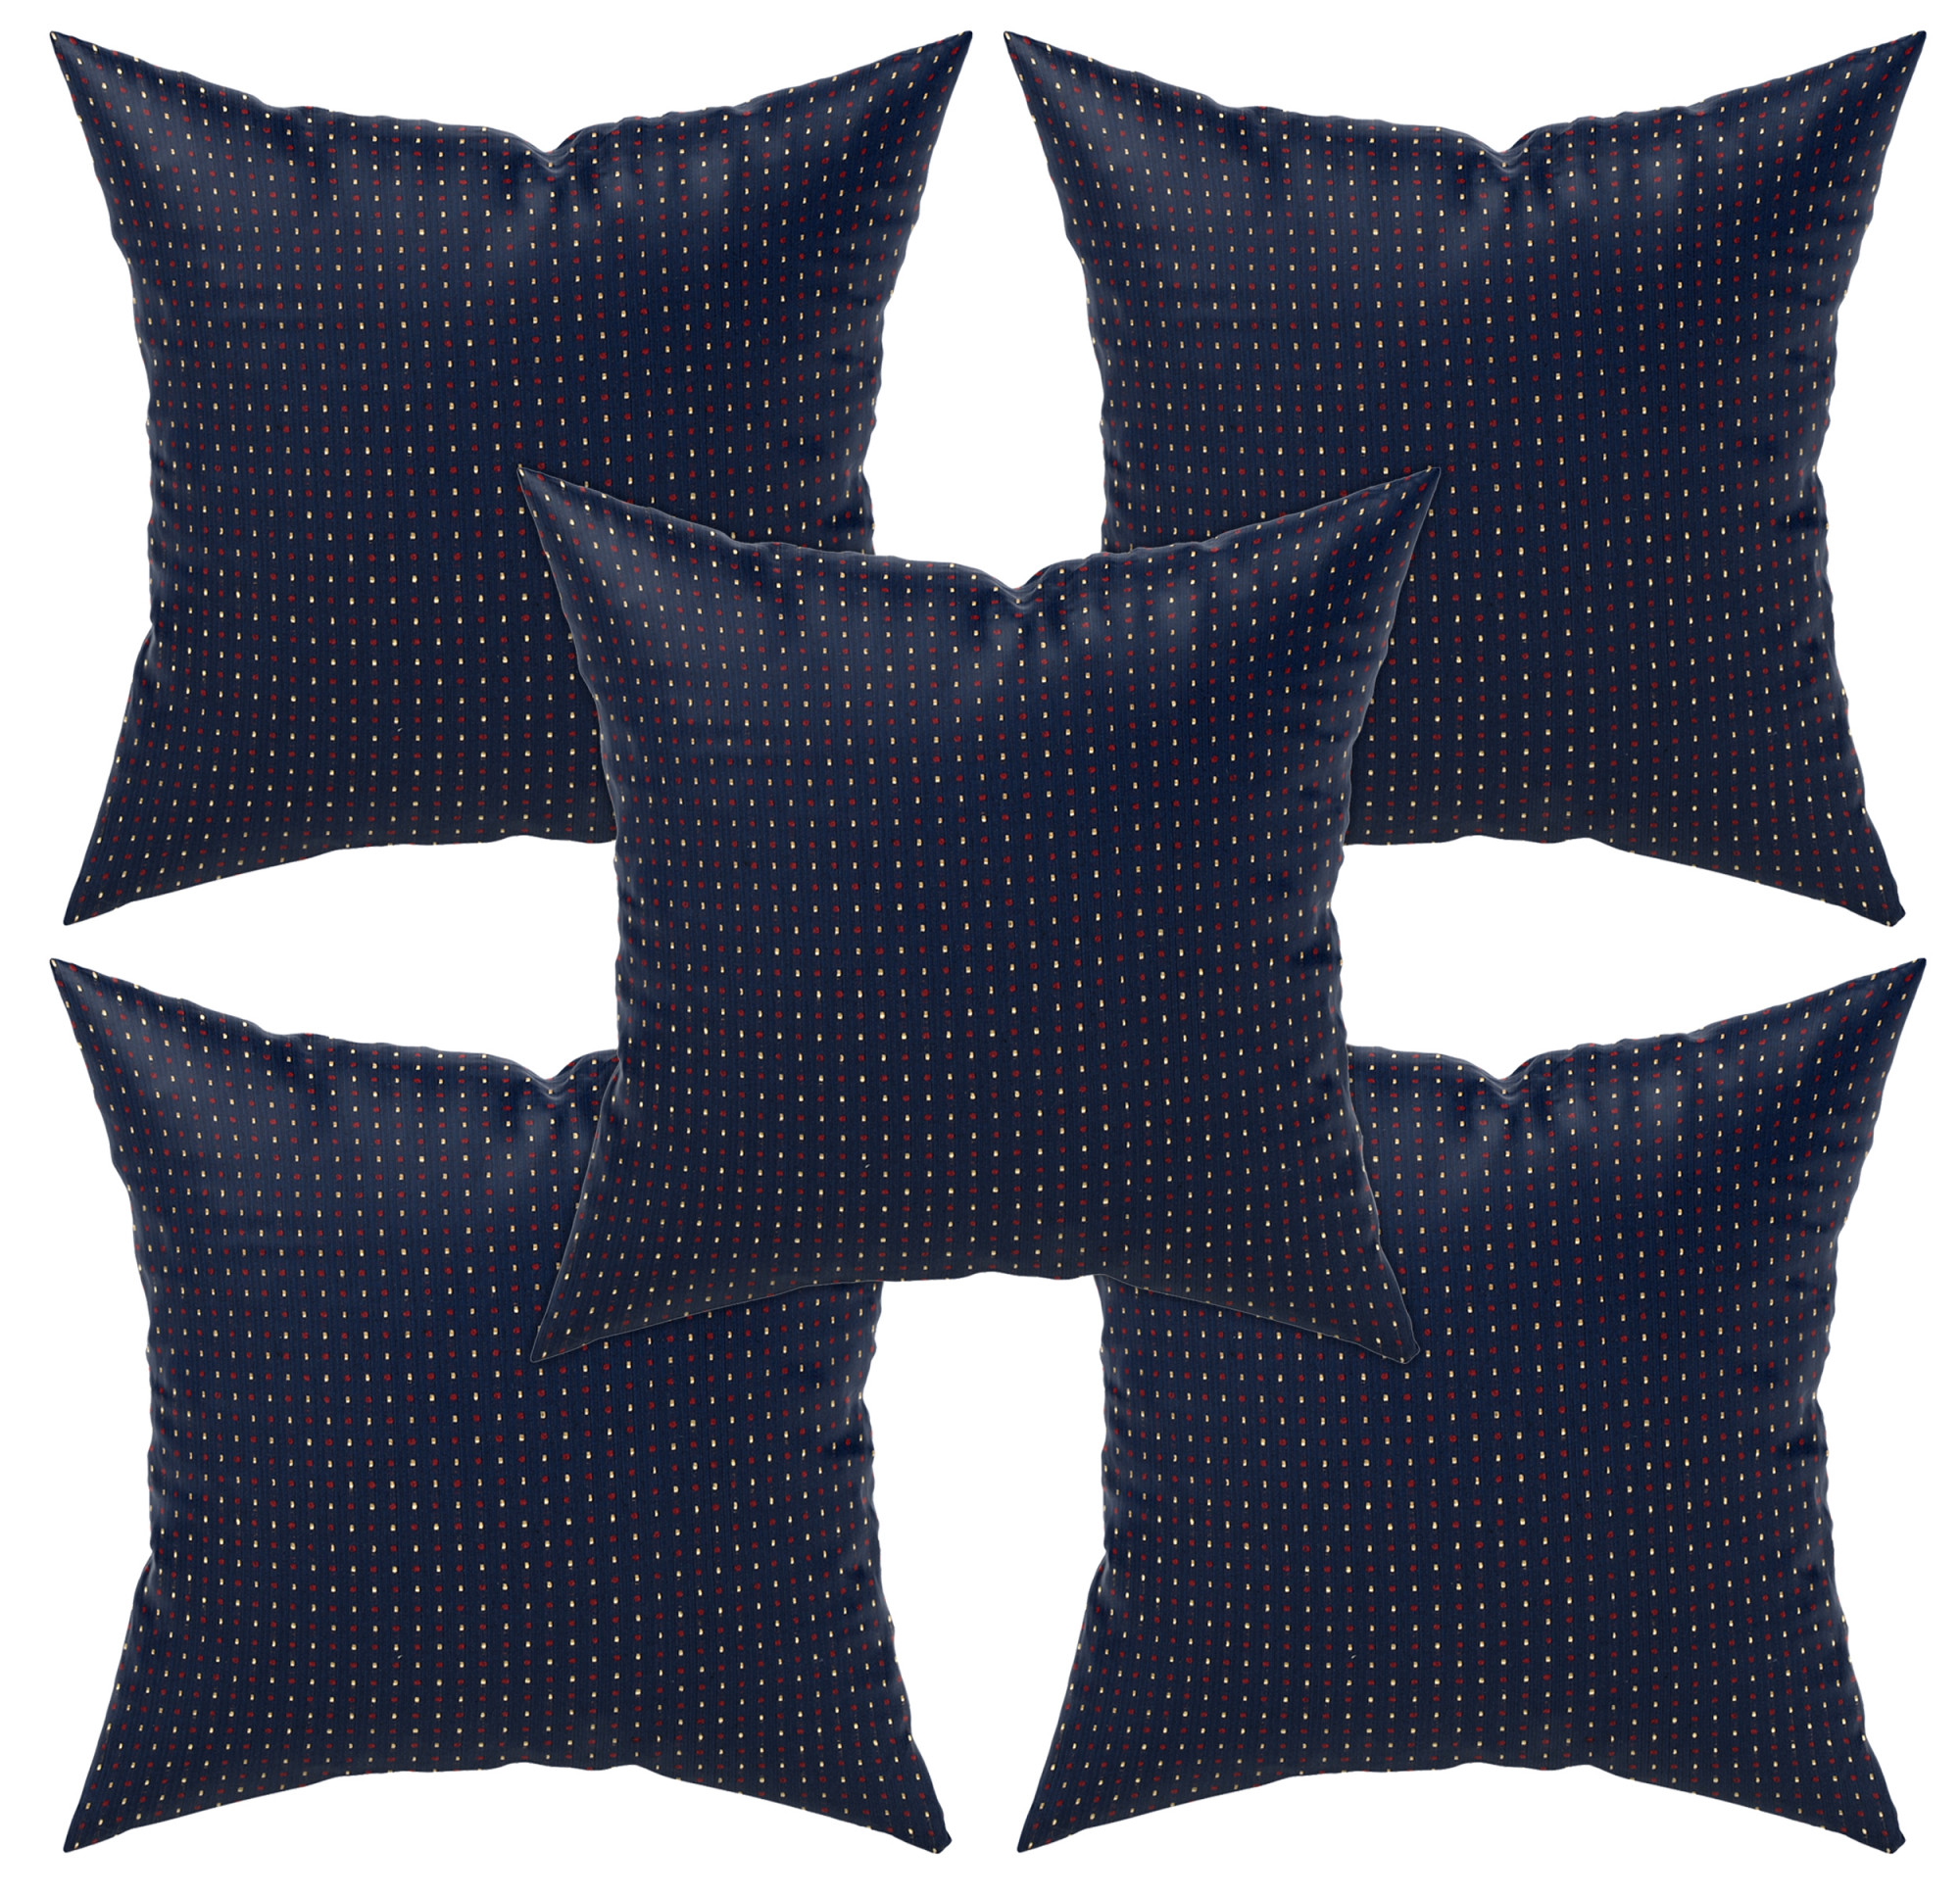 Kuber Industries Velvet Dot Printed Soft Decorative Square Throw Pillow Cover, Cushion Covers, Pillow Case For Sofa Couch Bed Chair 16x16 Inch-(Sky Blue)